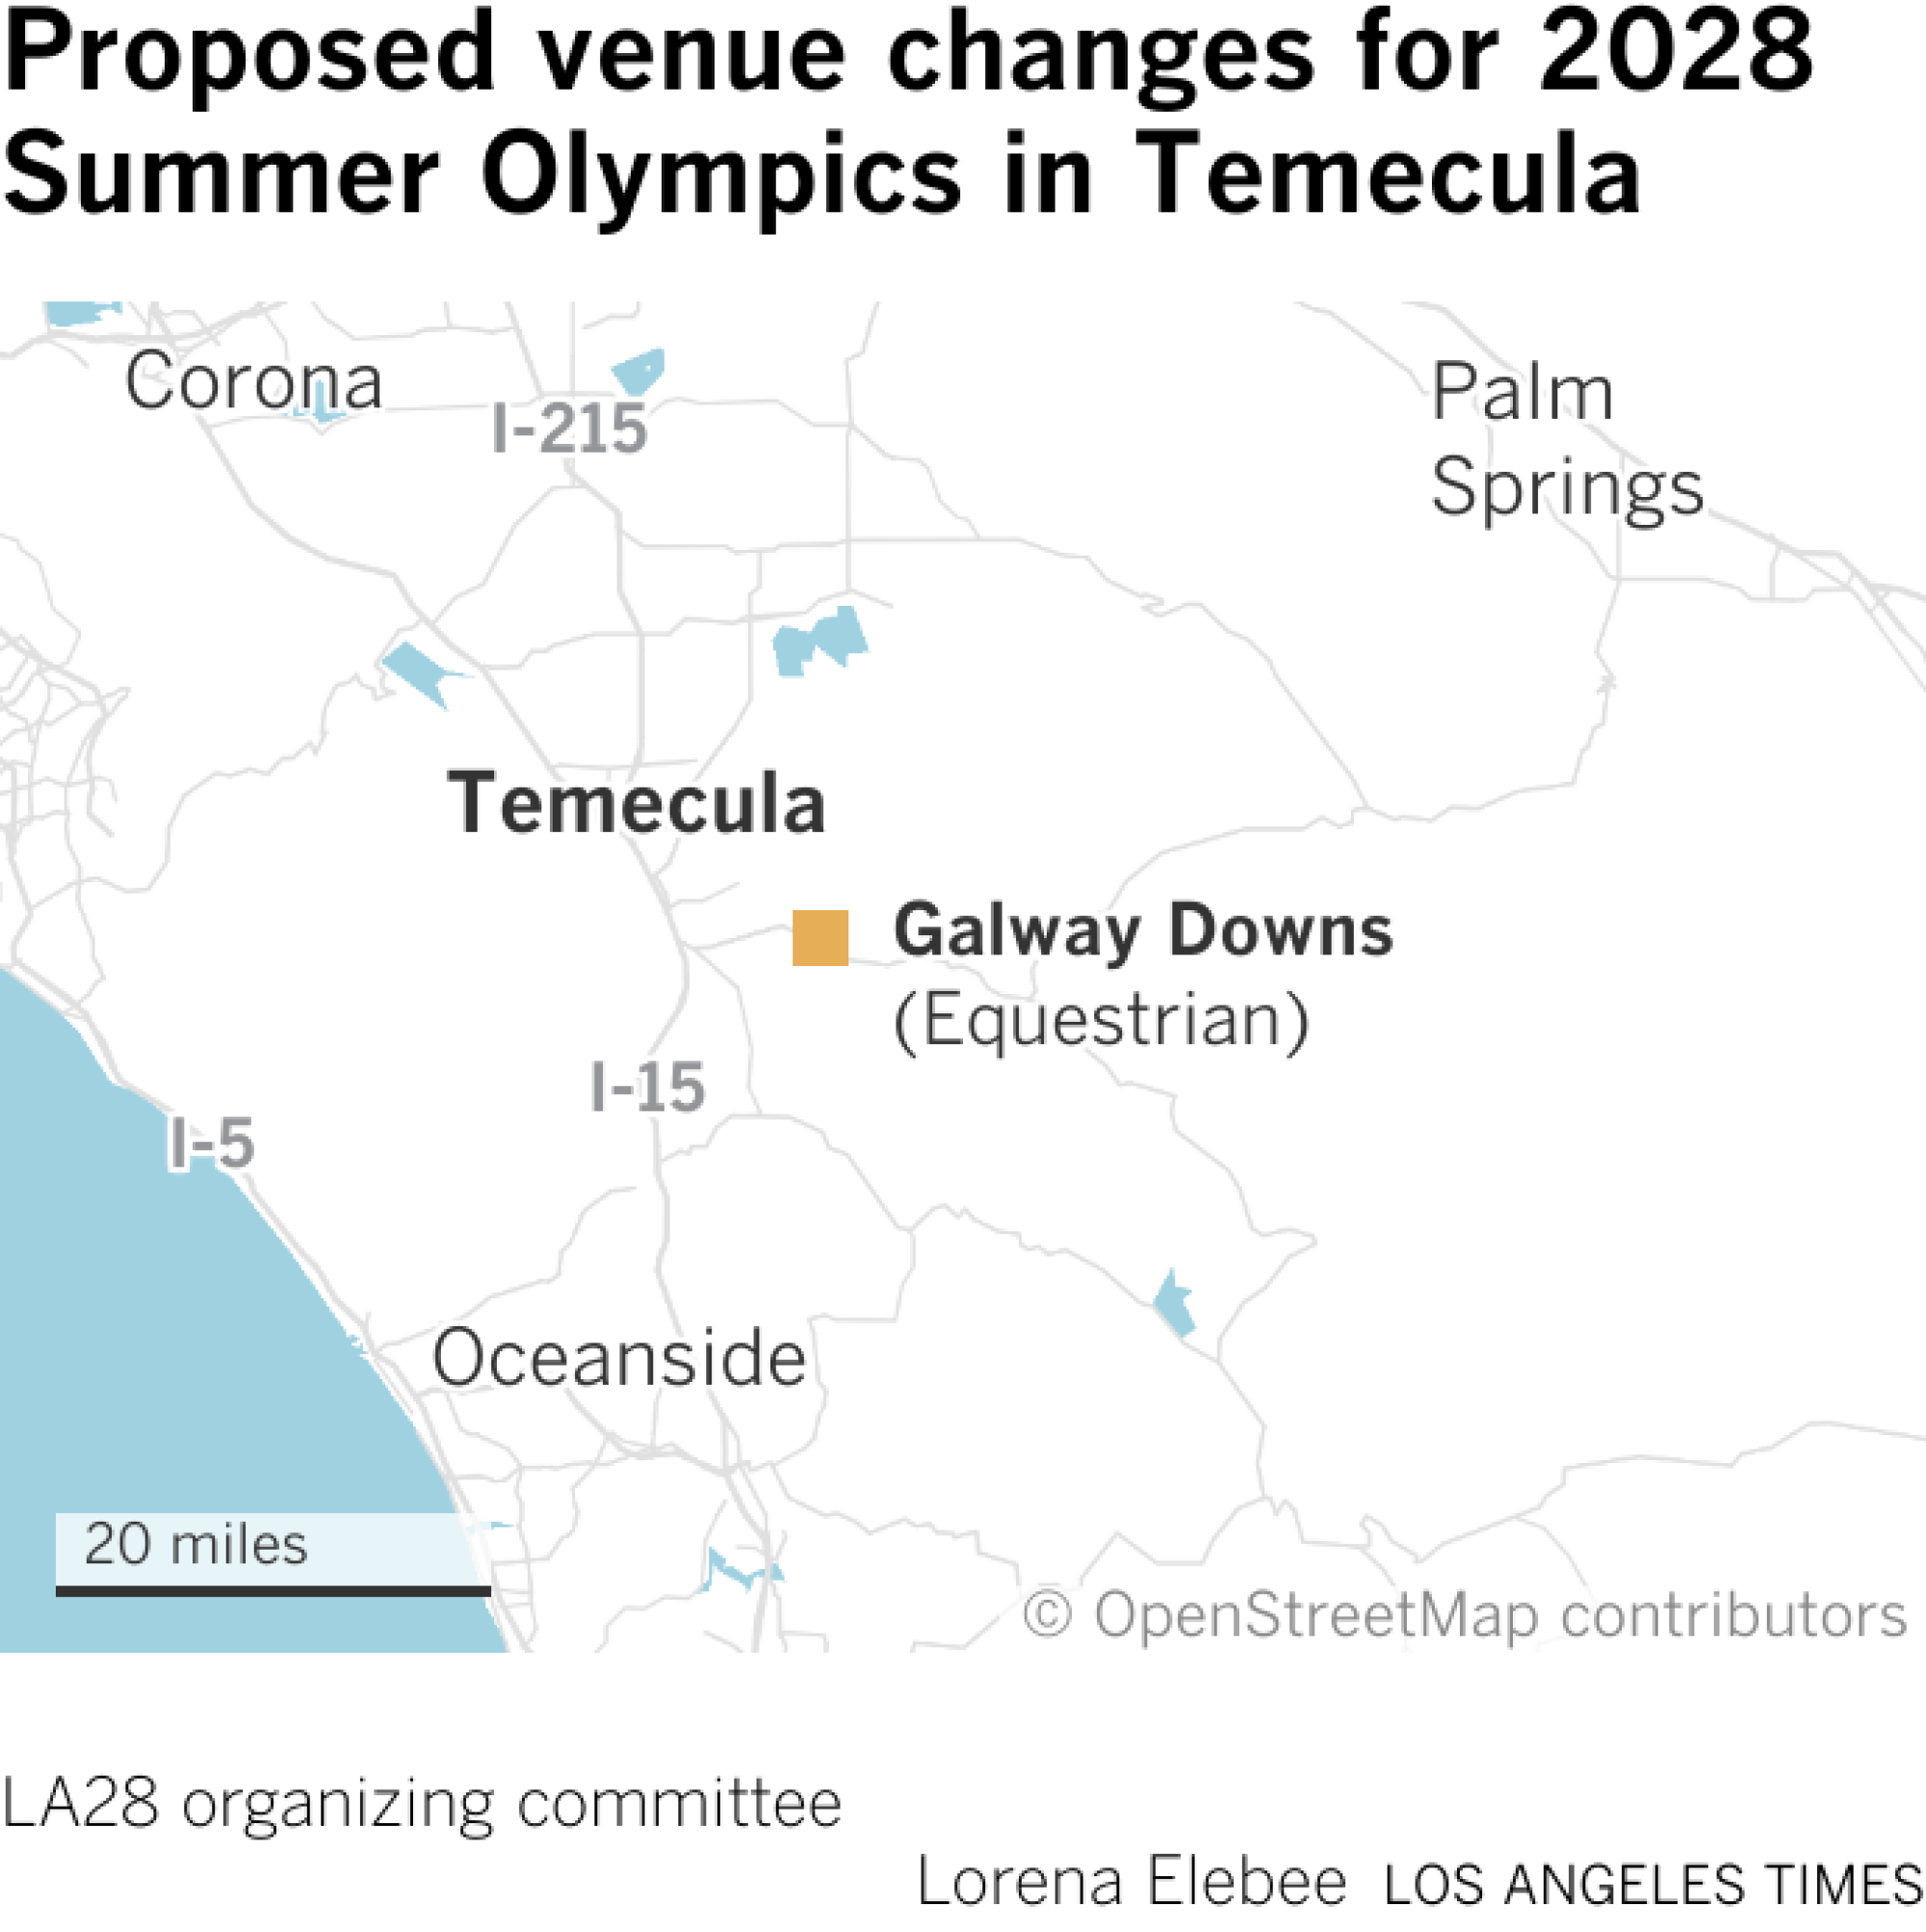 Map showing proposed venue changes for 2028 Summer Olympics in Temecula.